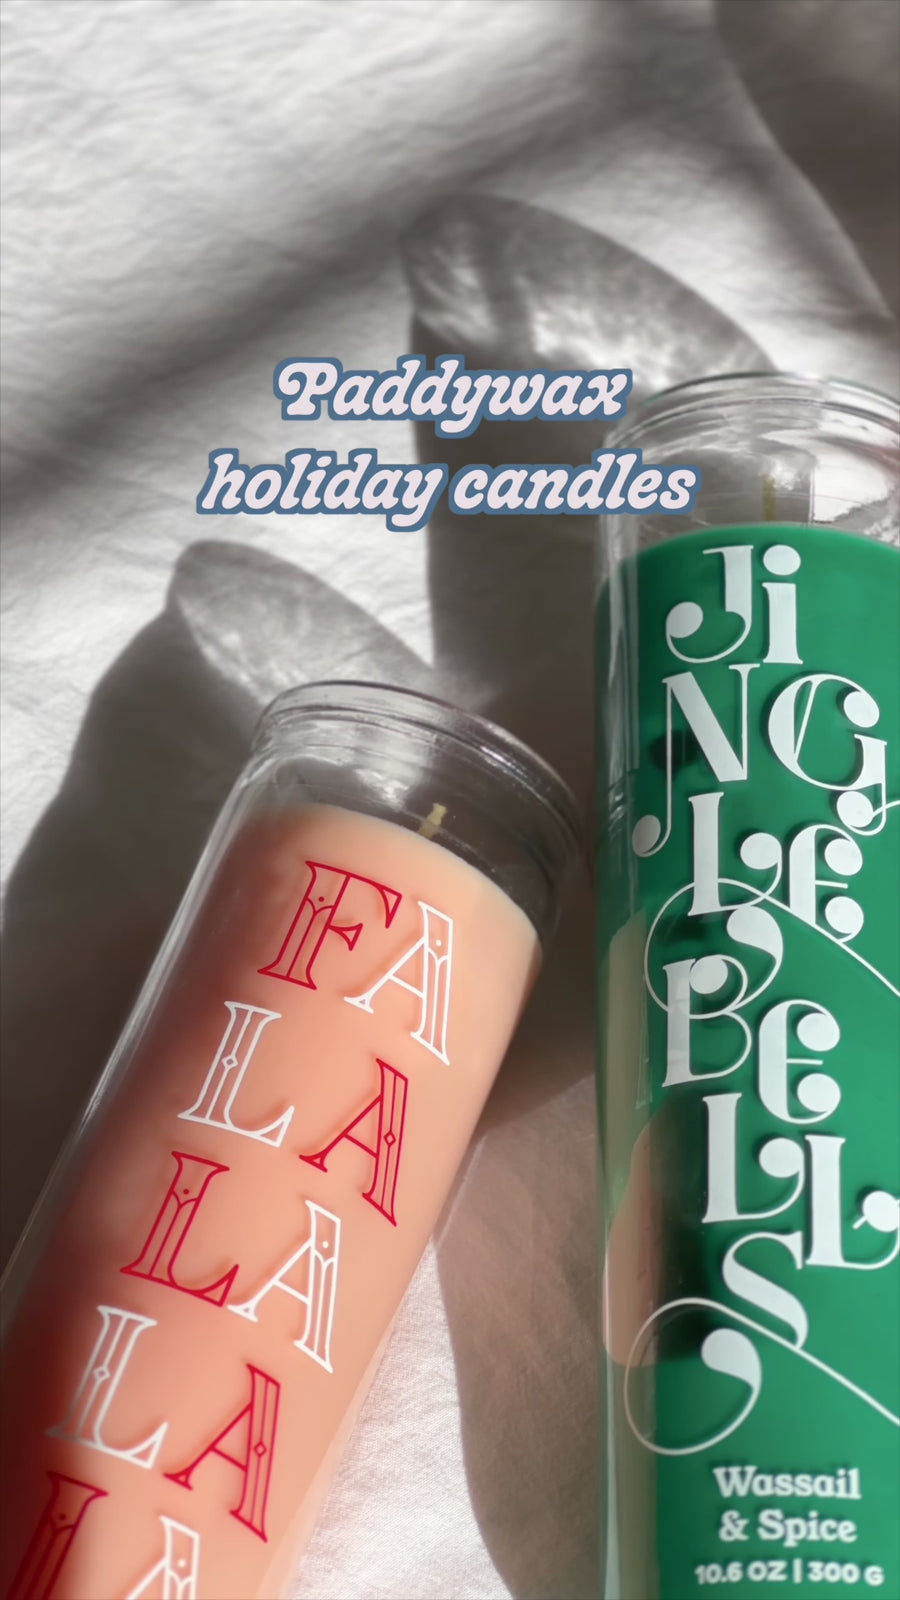 4 10.6 oz paddywax holiday scented pillar candles